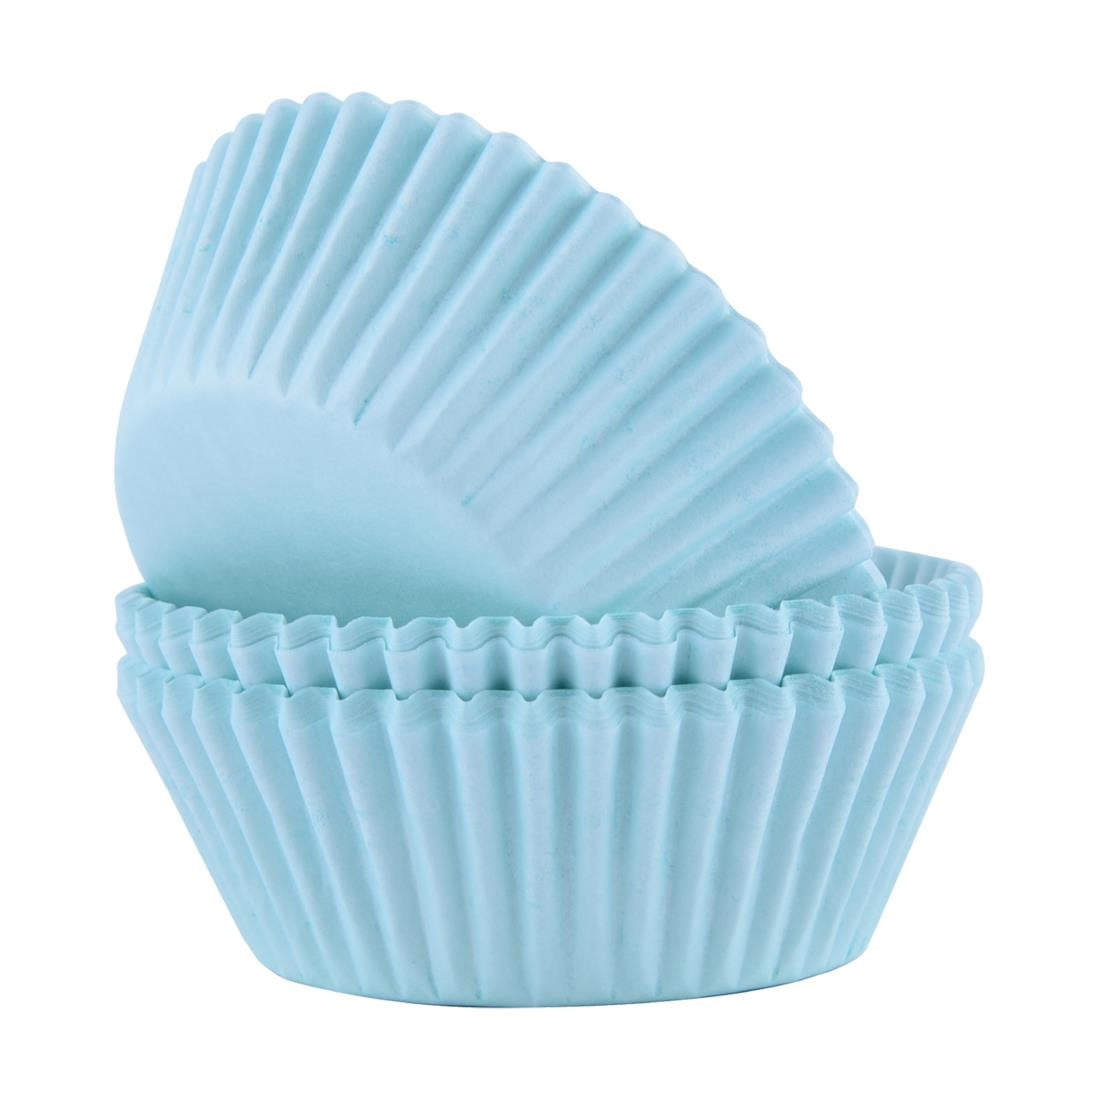 CX140 PME Block Colour Cupcake Cases Mint Green, Pack of 60 JD Catering Equipment Solutions Ltd